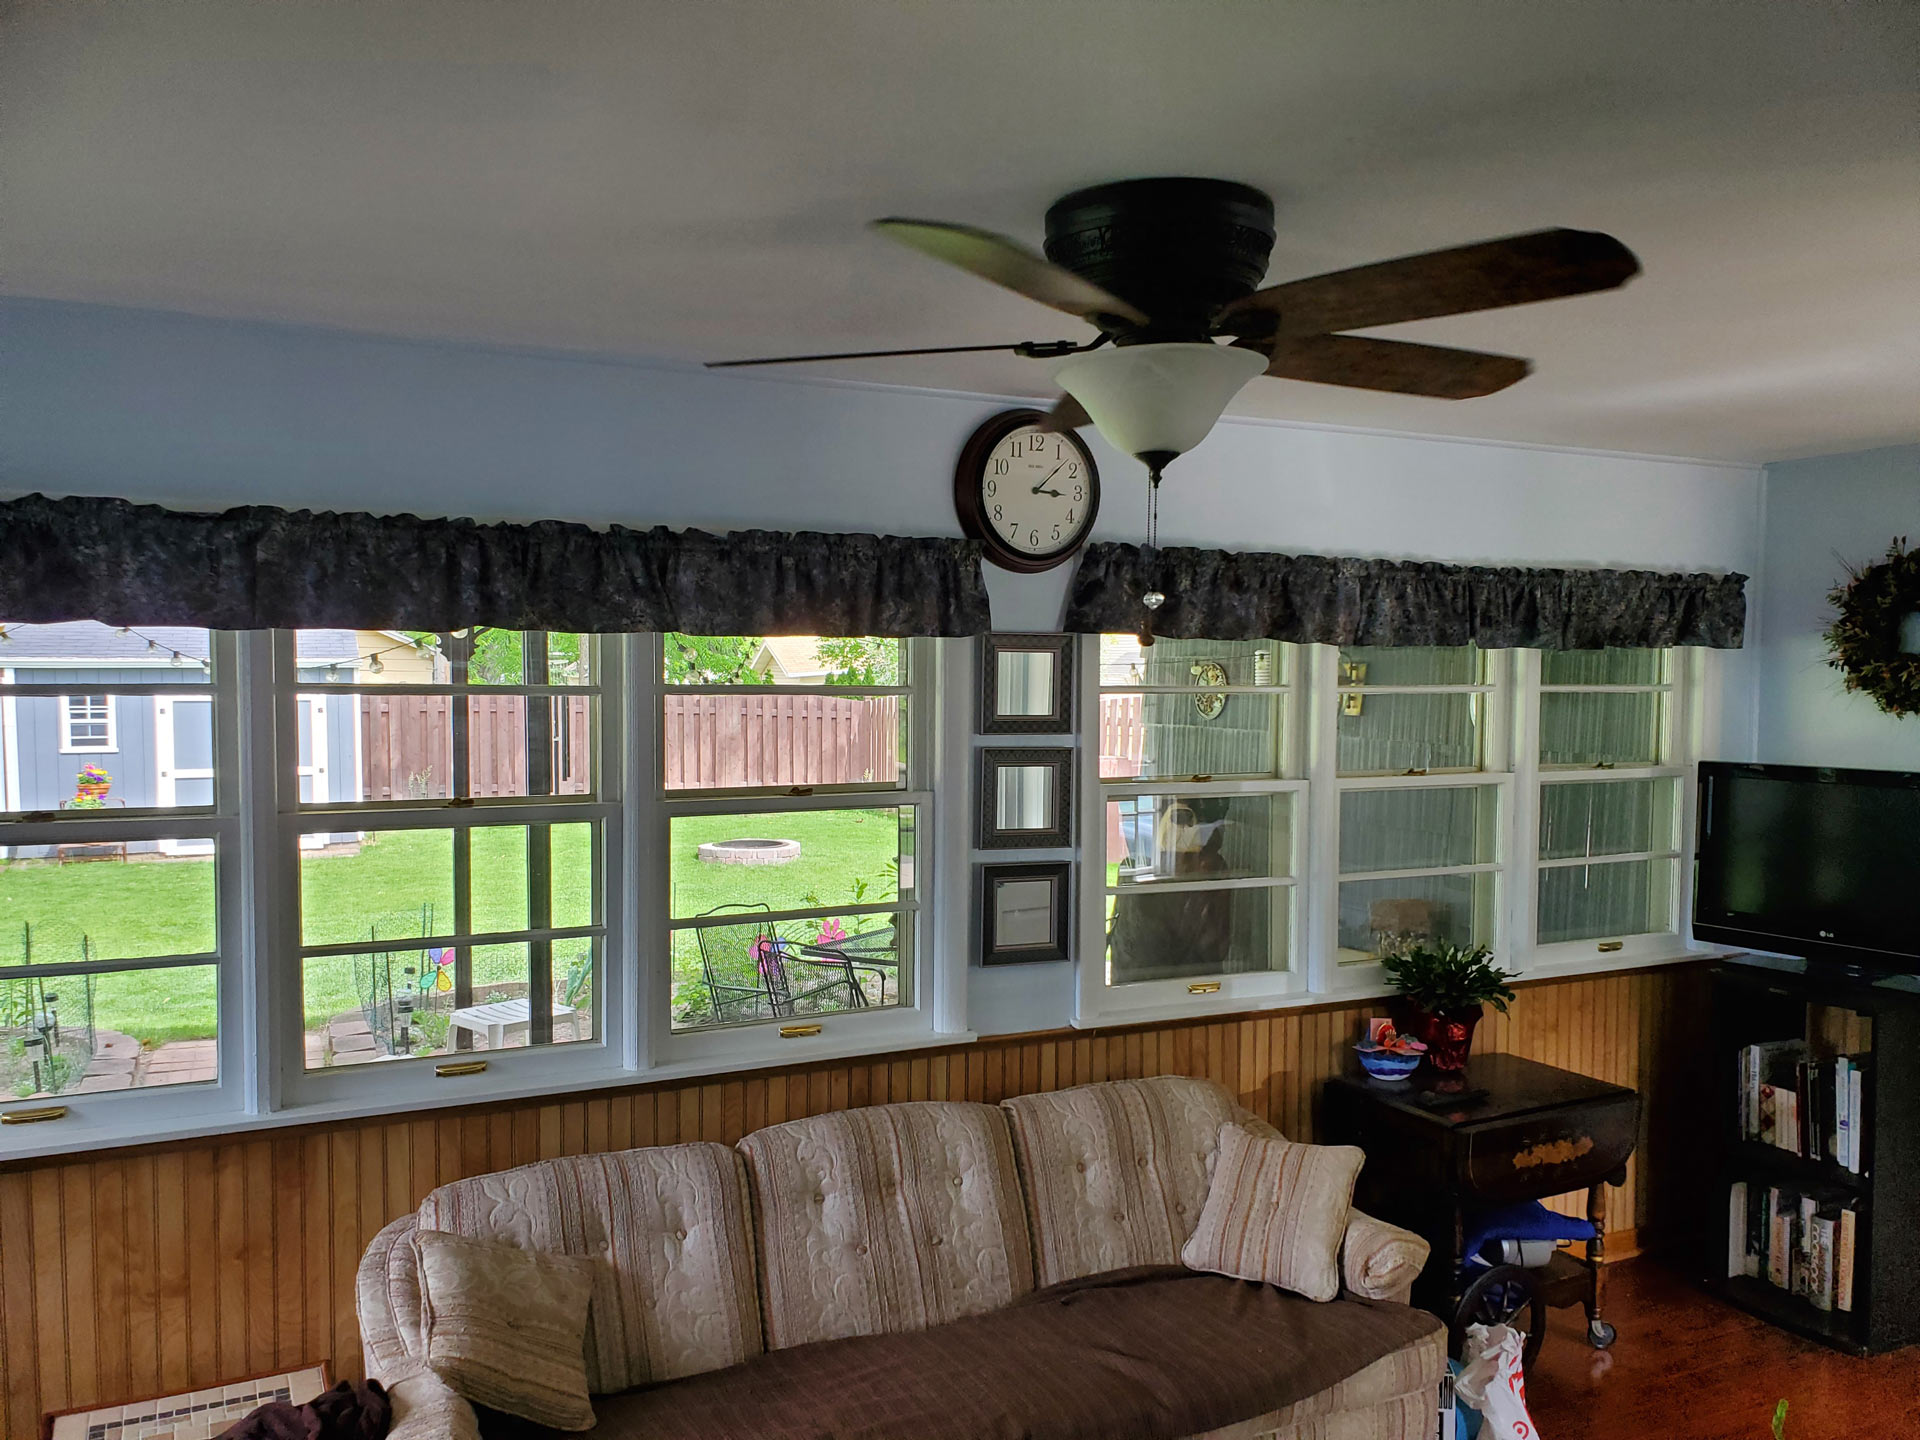 Interior view of multiple double hung windows looking into a sunroom